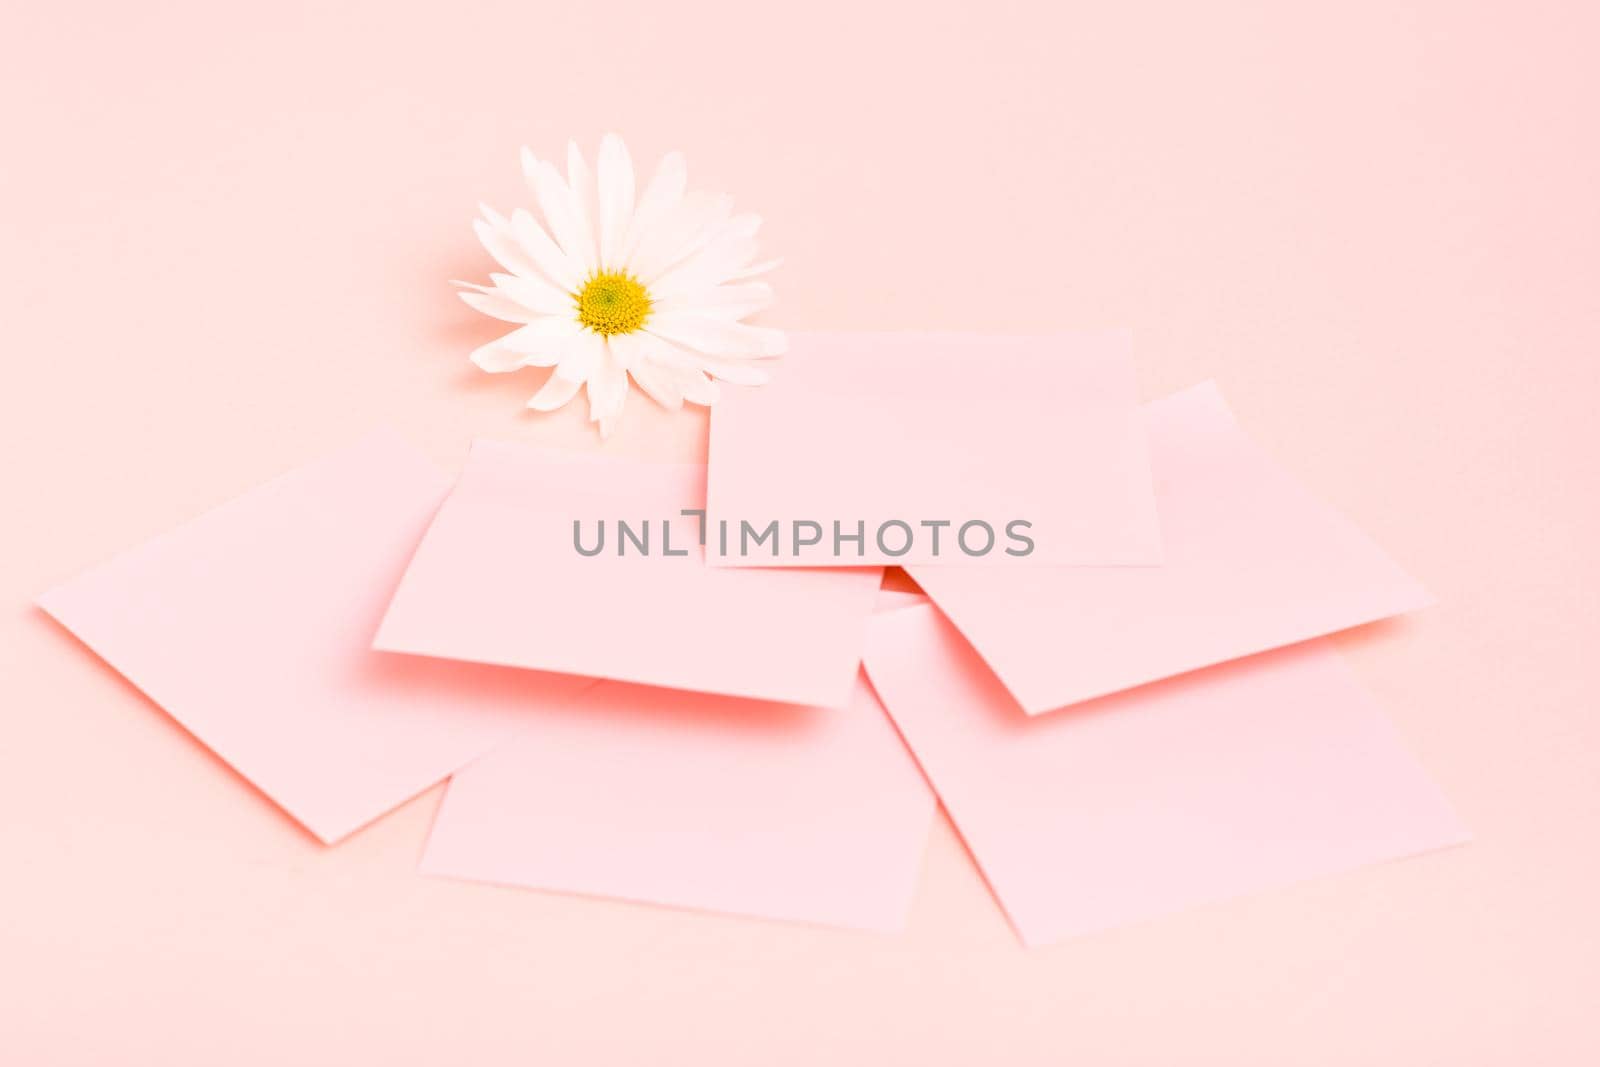 The concept is pink. Blank square small writing sheets and chrysanthemum on a pink background by Aleruana